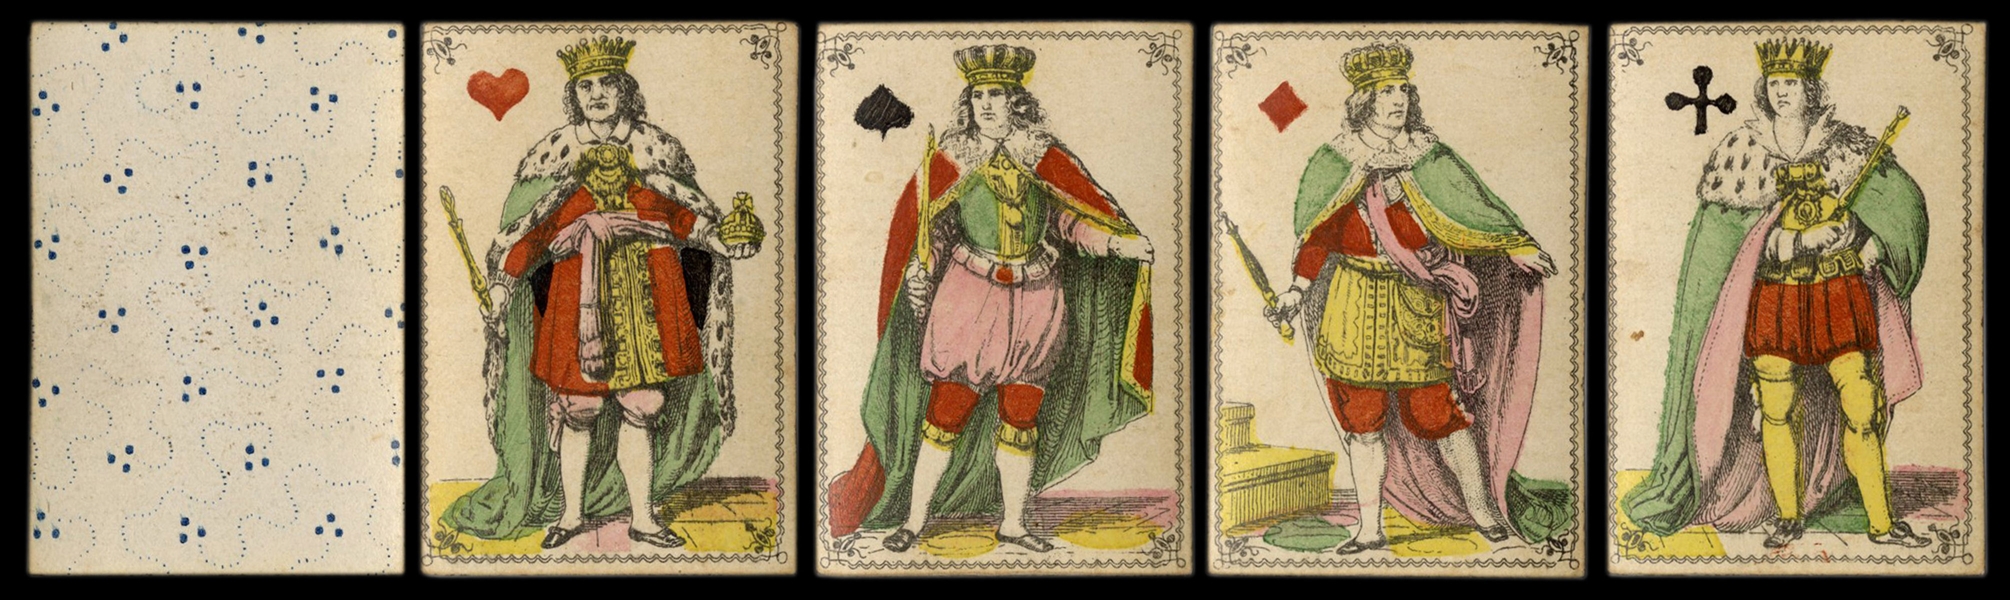  Miniature Hand-Colored Playing Cards. French [?], ca. 1851....